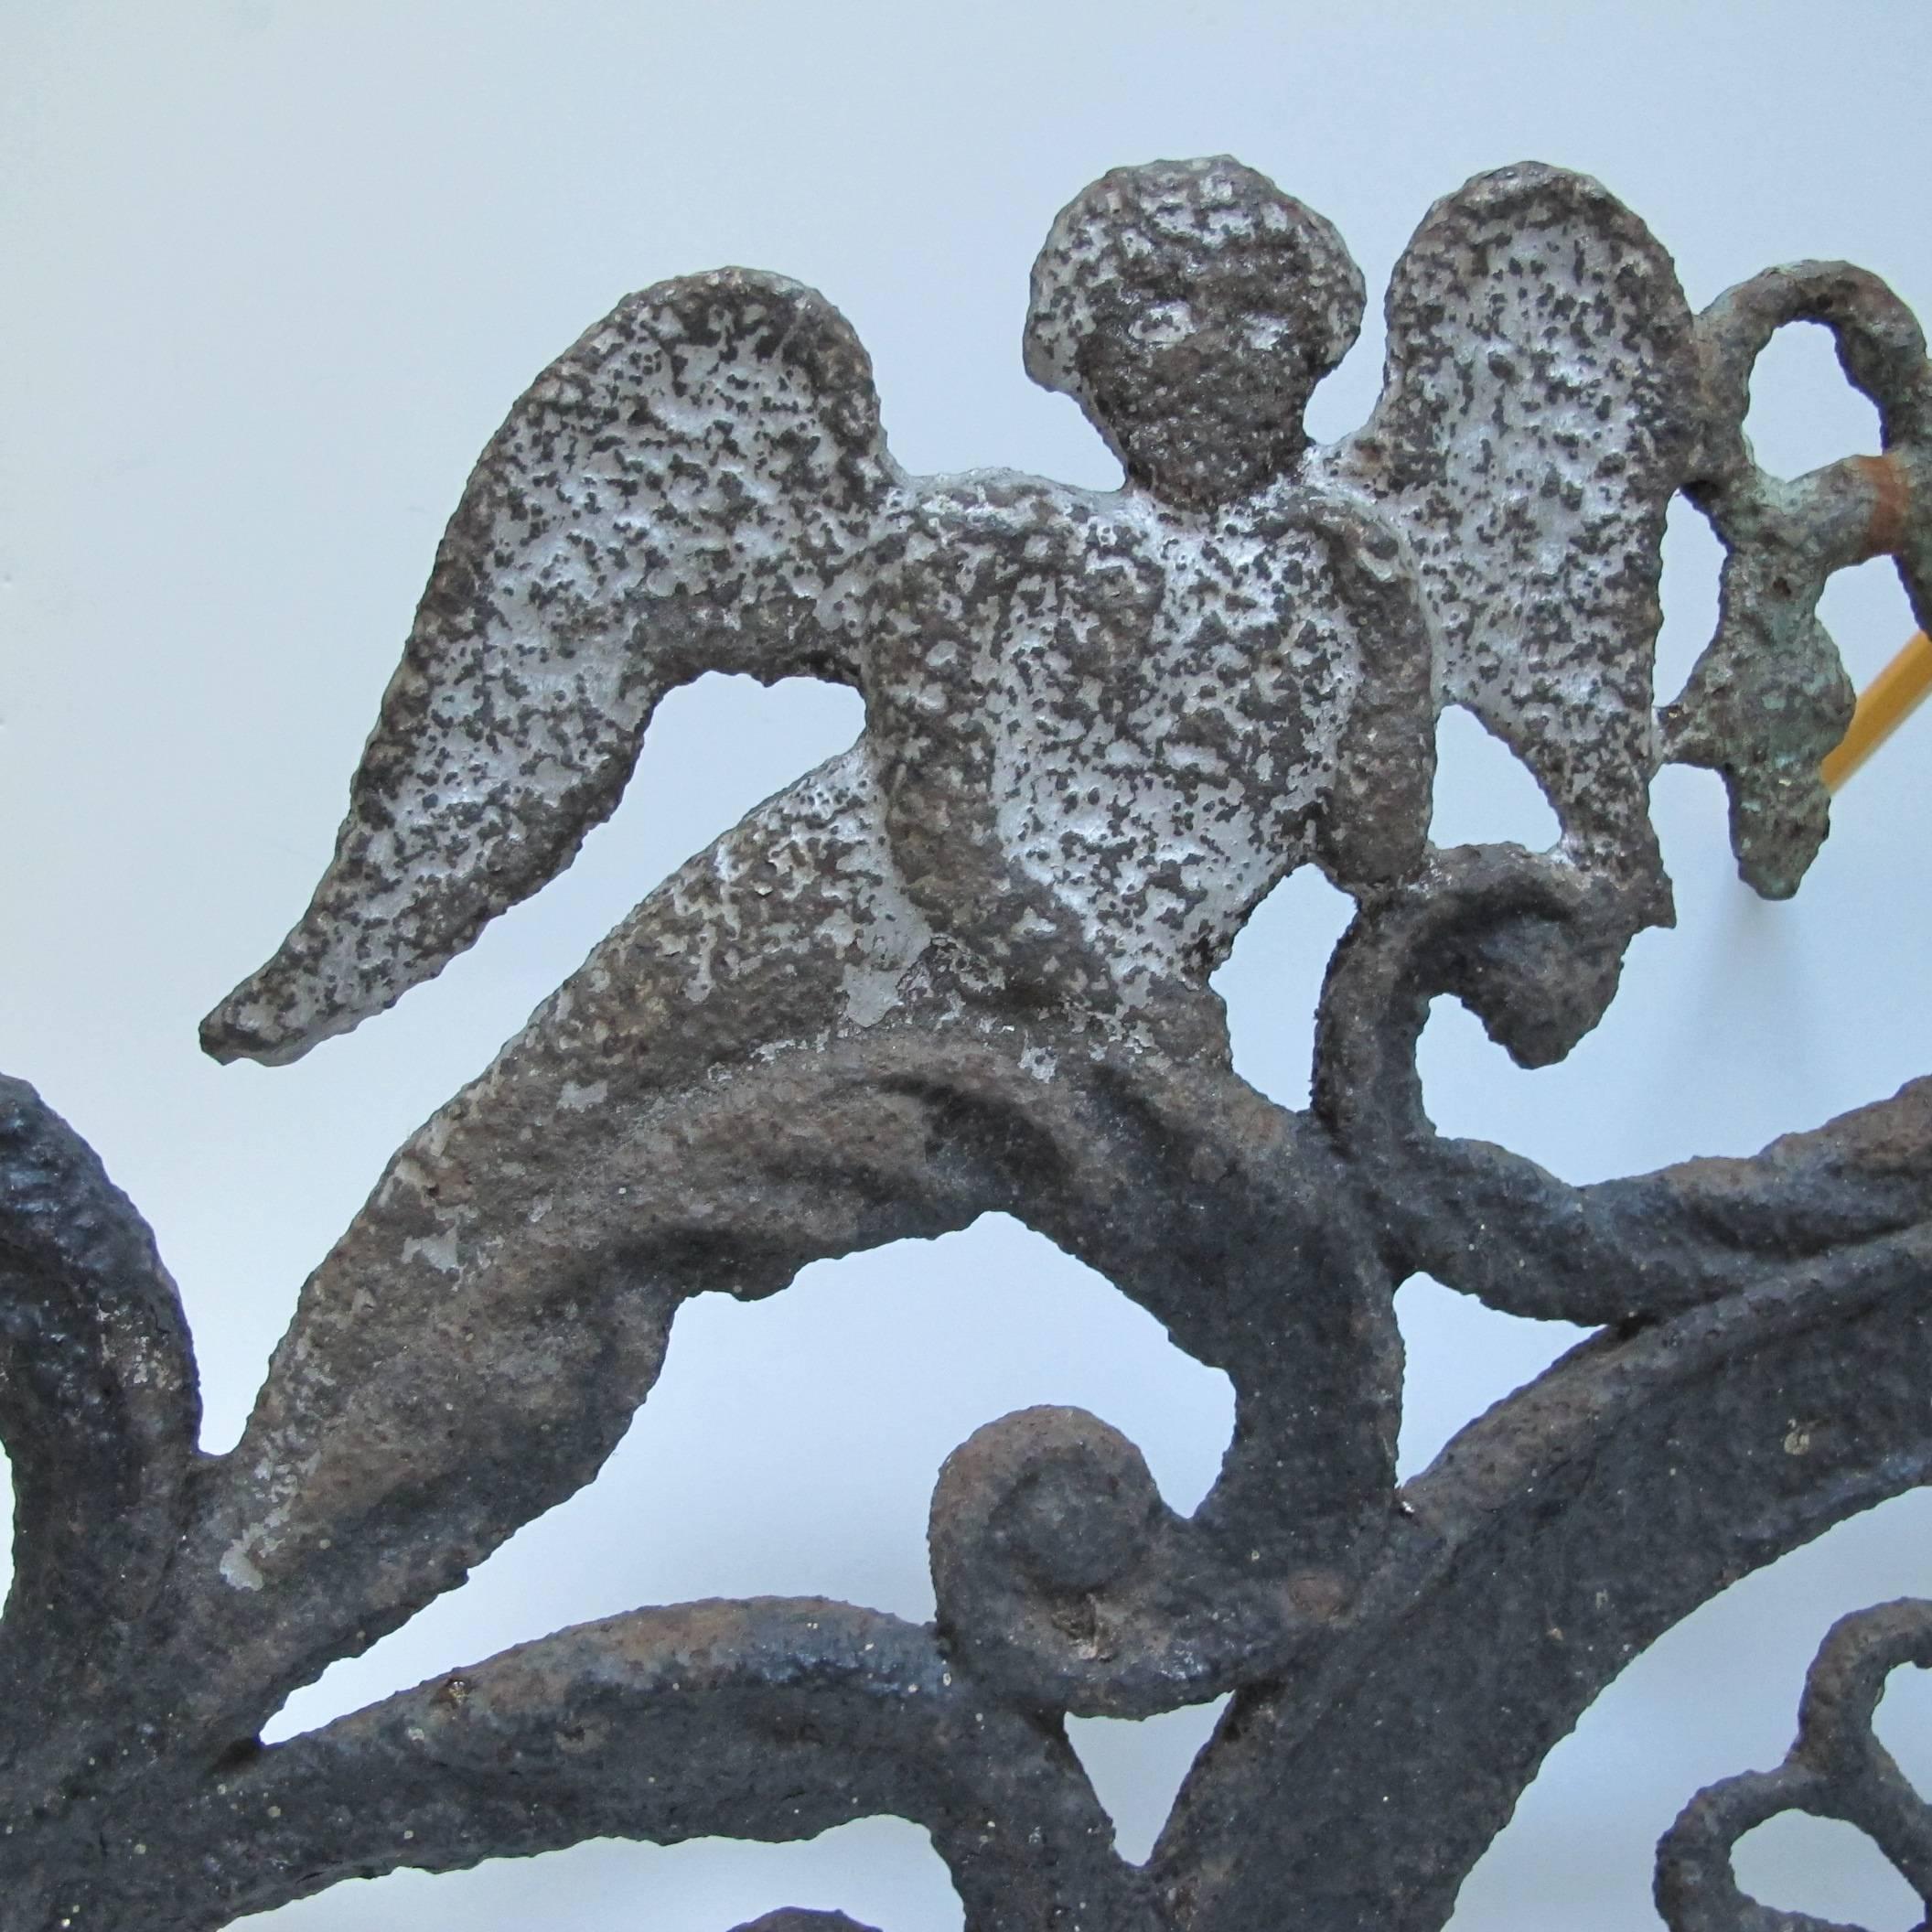 Finely made cast iron fence or gate top from the 19th century. The angels flank an urn which may have come from a relocated cemetery which happened as roads were built. Formerly from the collection of early American Folk Art of Harvey and Isobel